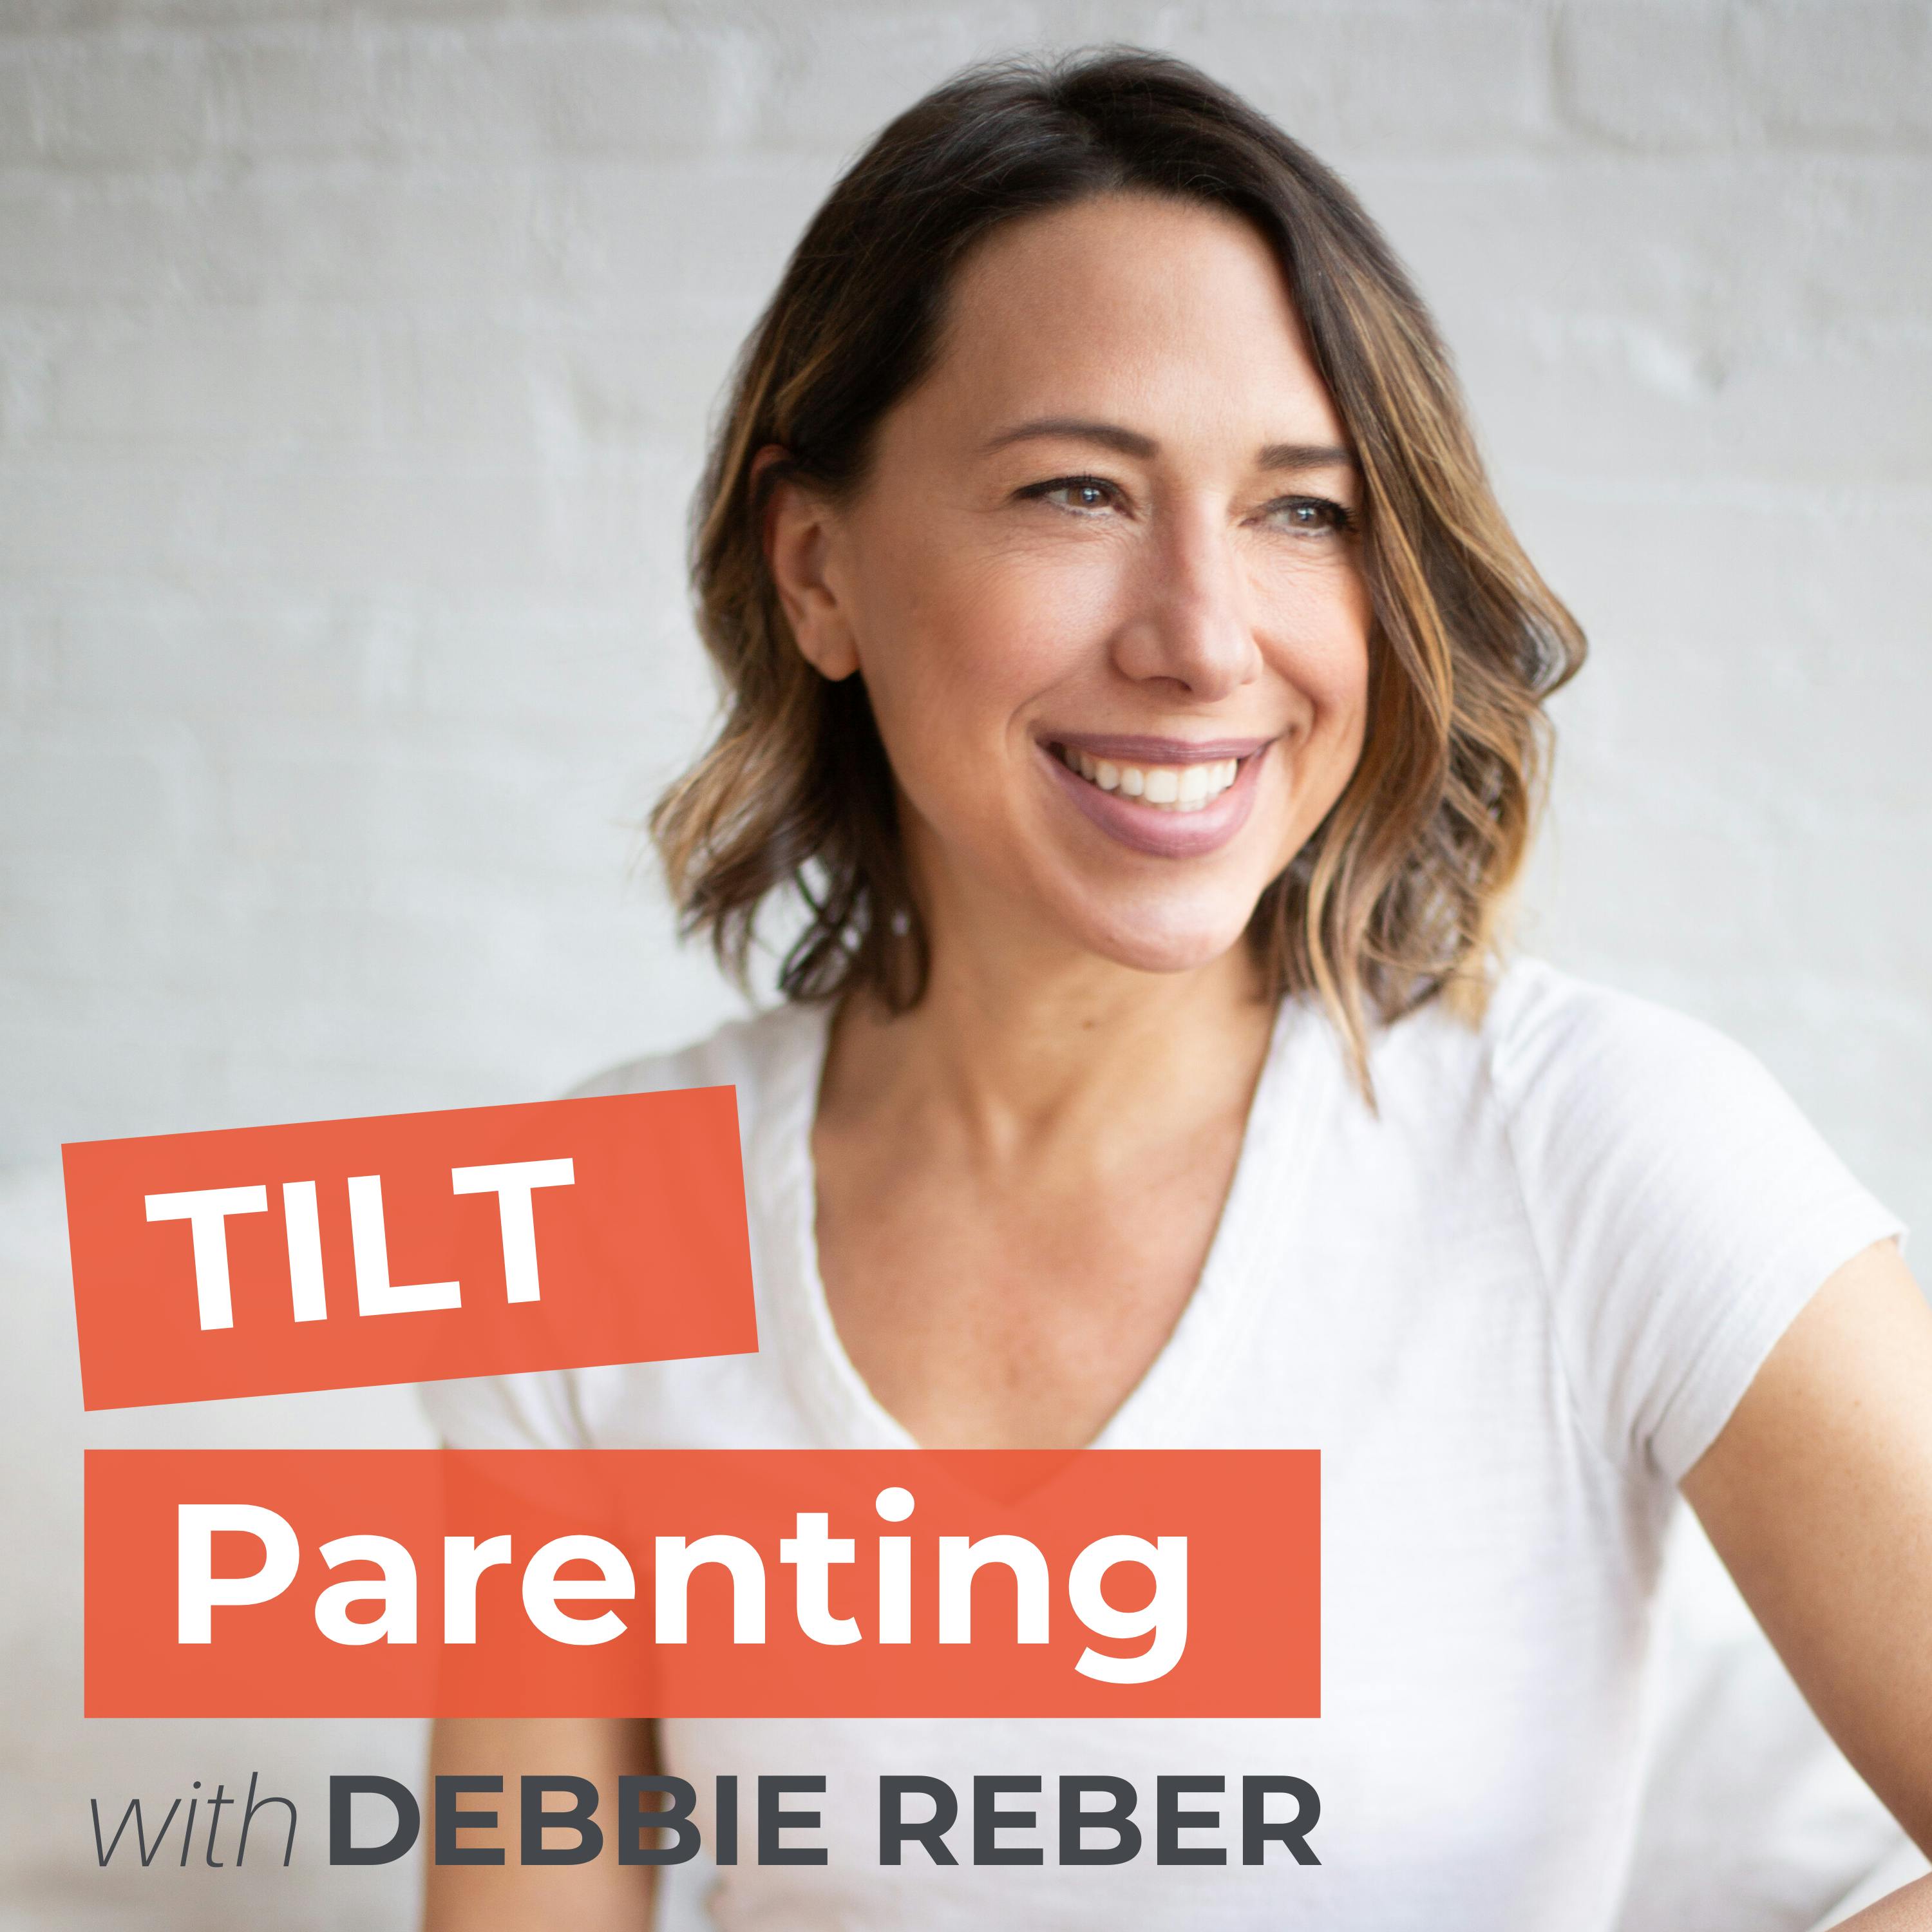 TPP 079: Coach and Author Andrea Owen on Raising Her Differently-Wired Son